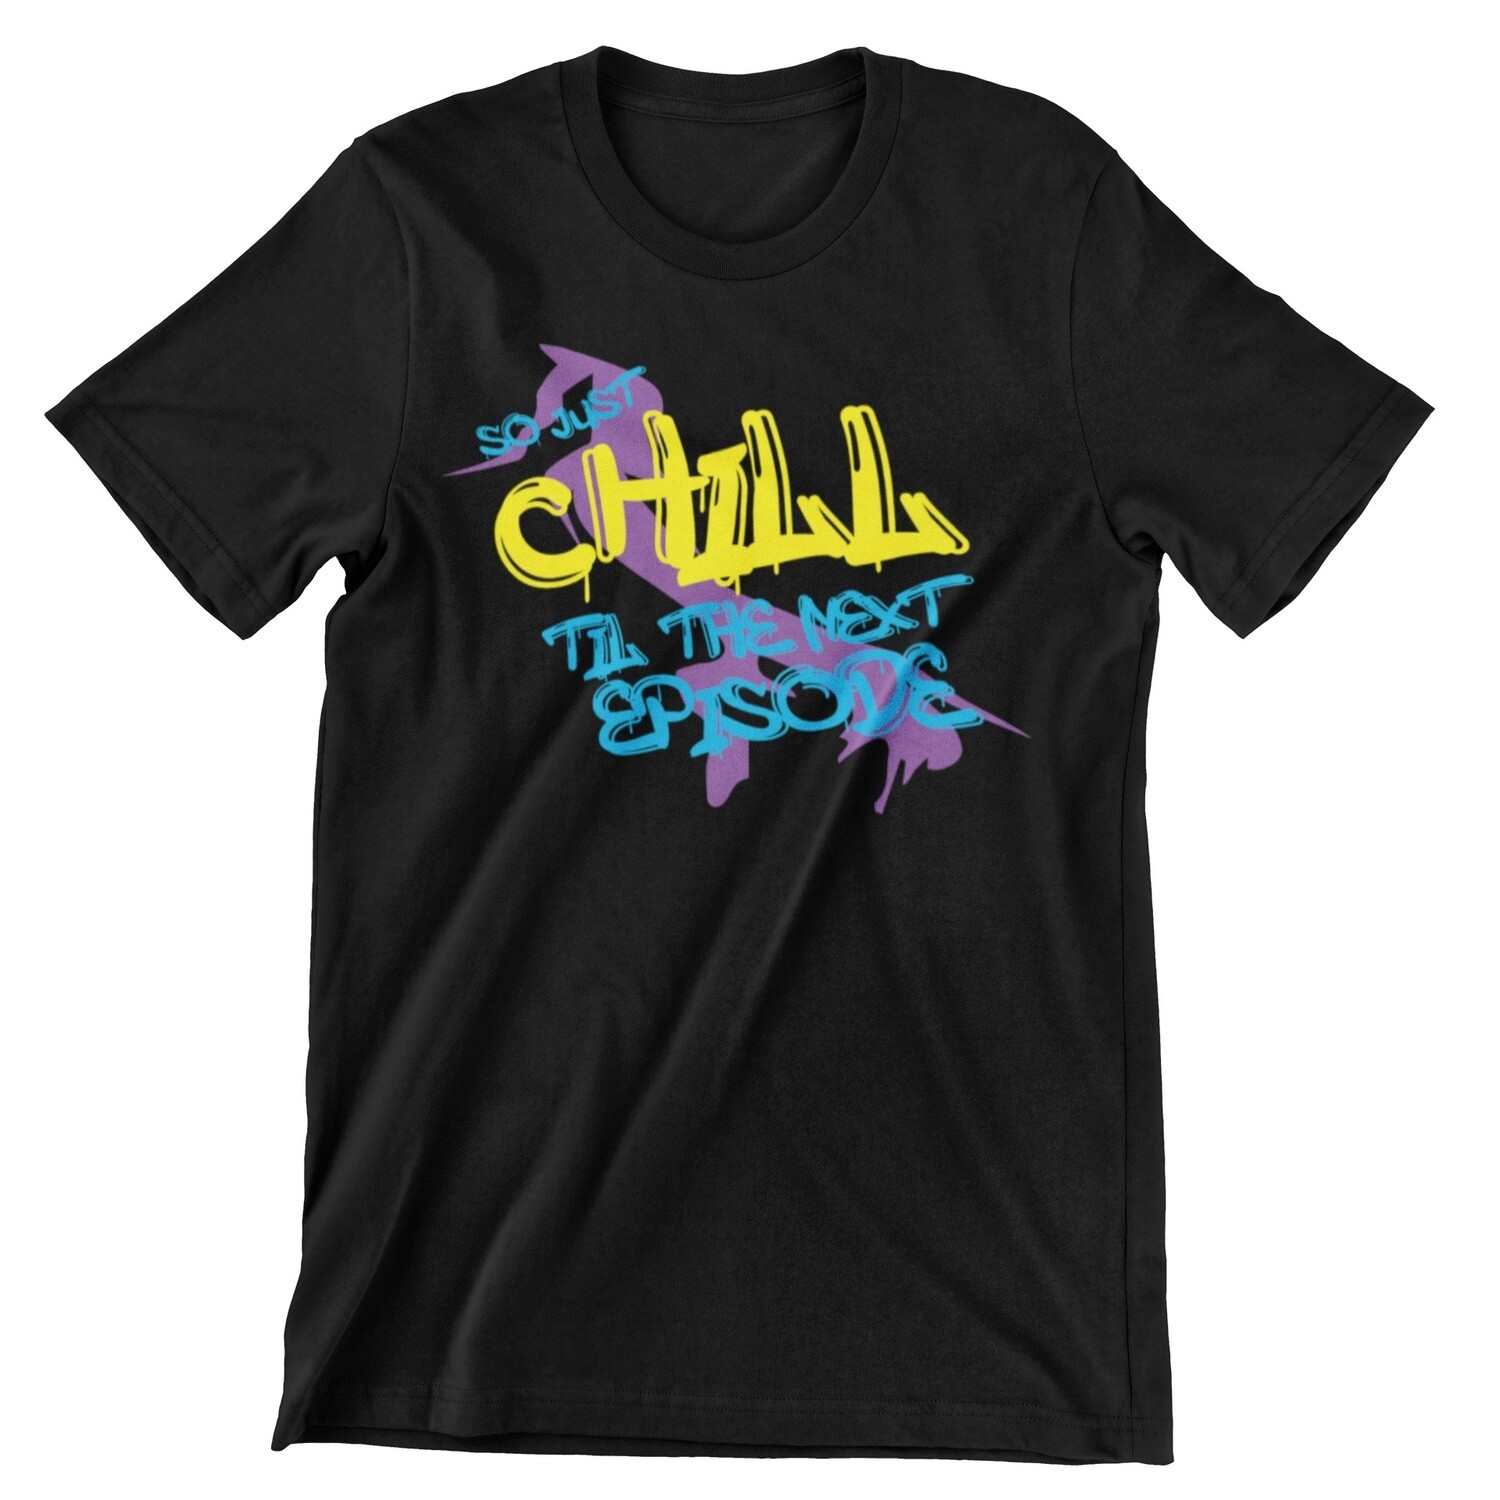 Just Chill T-Shirt, Color: Black